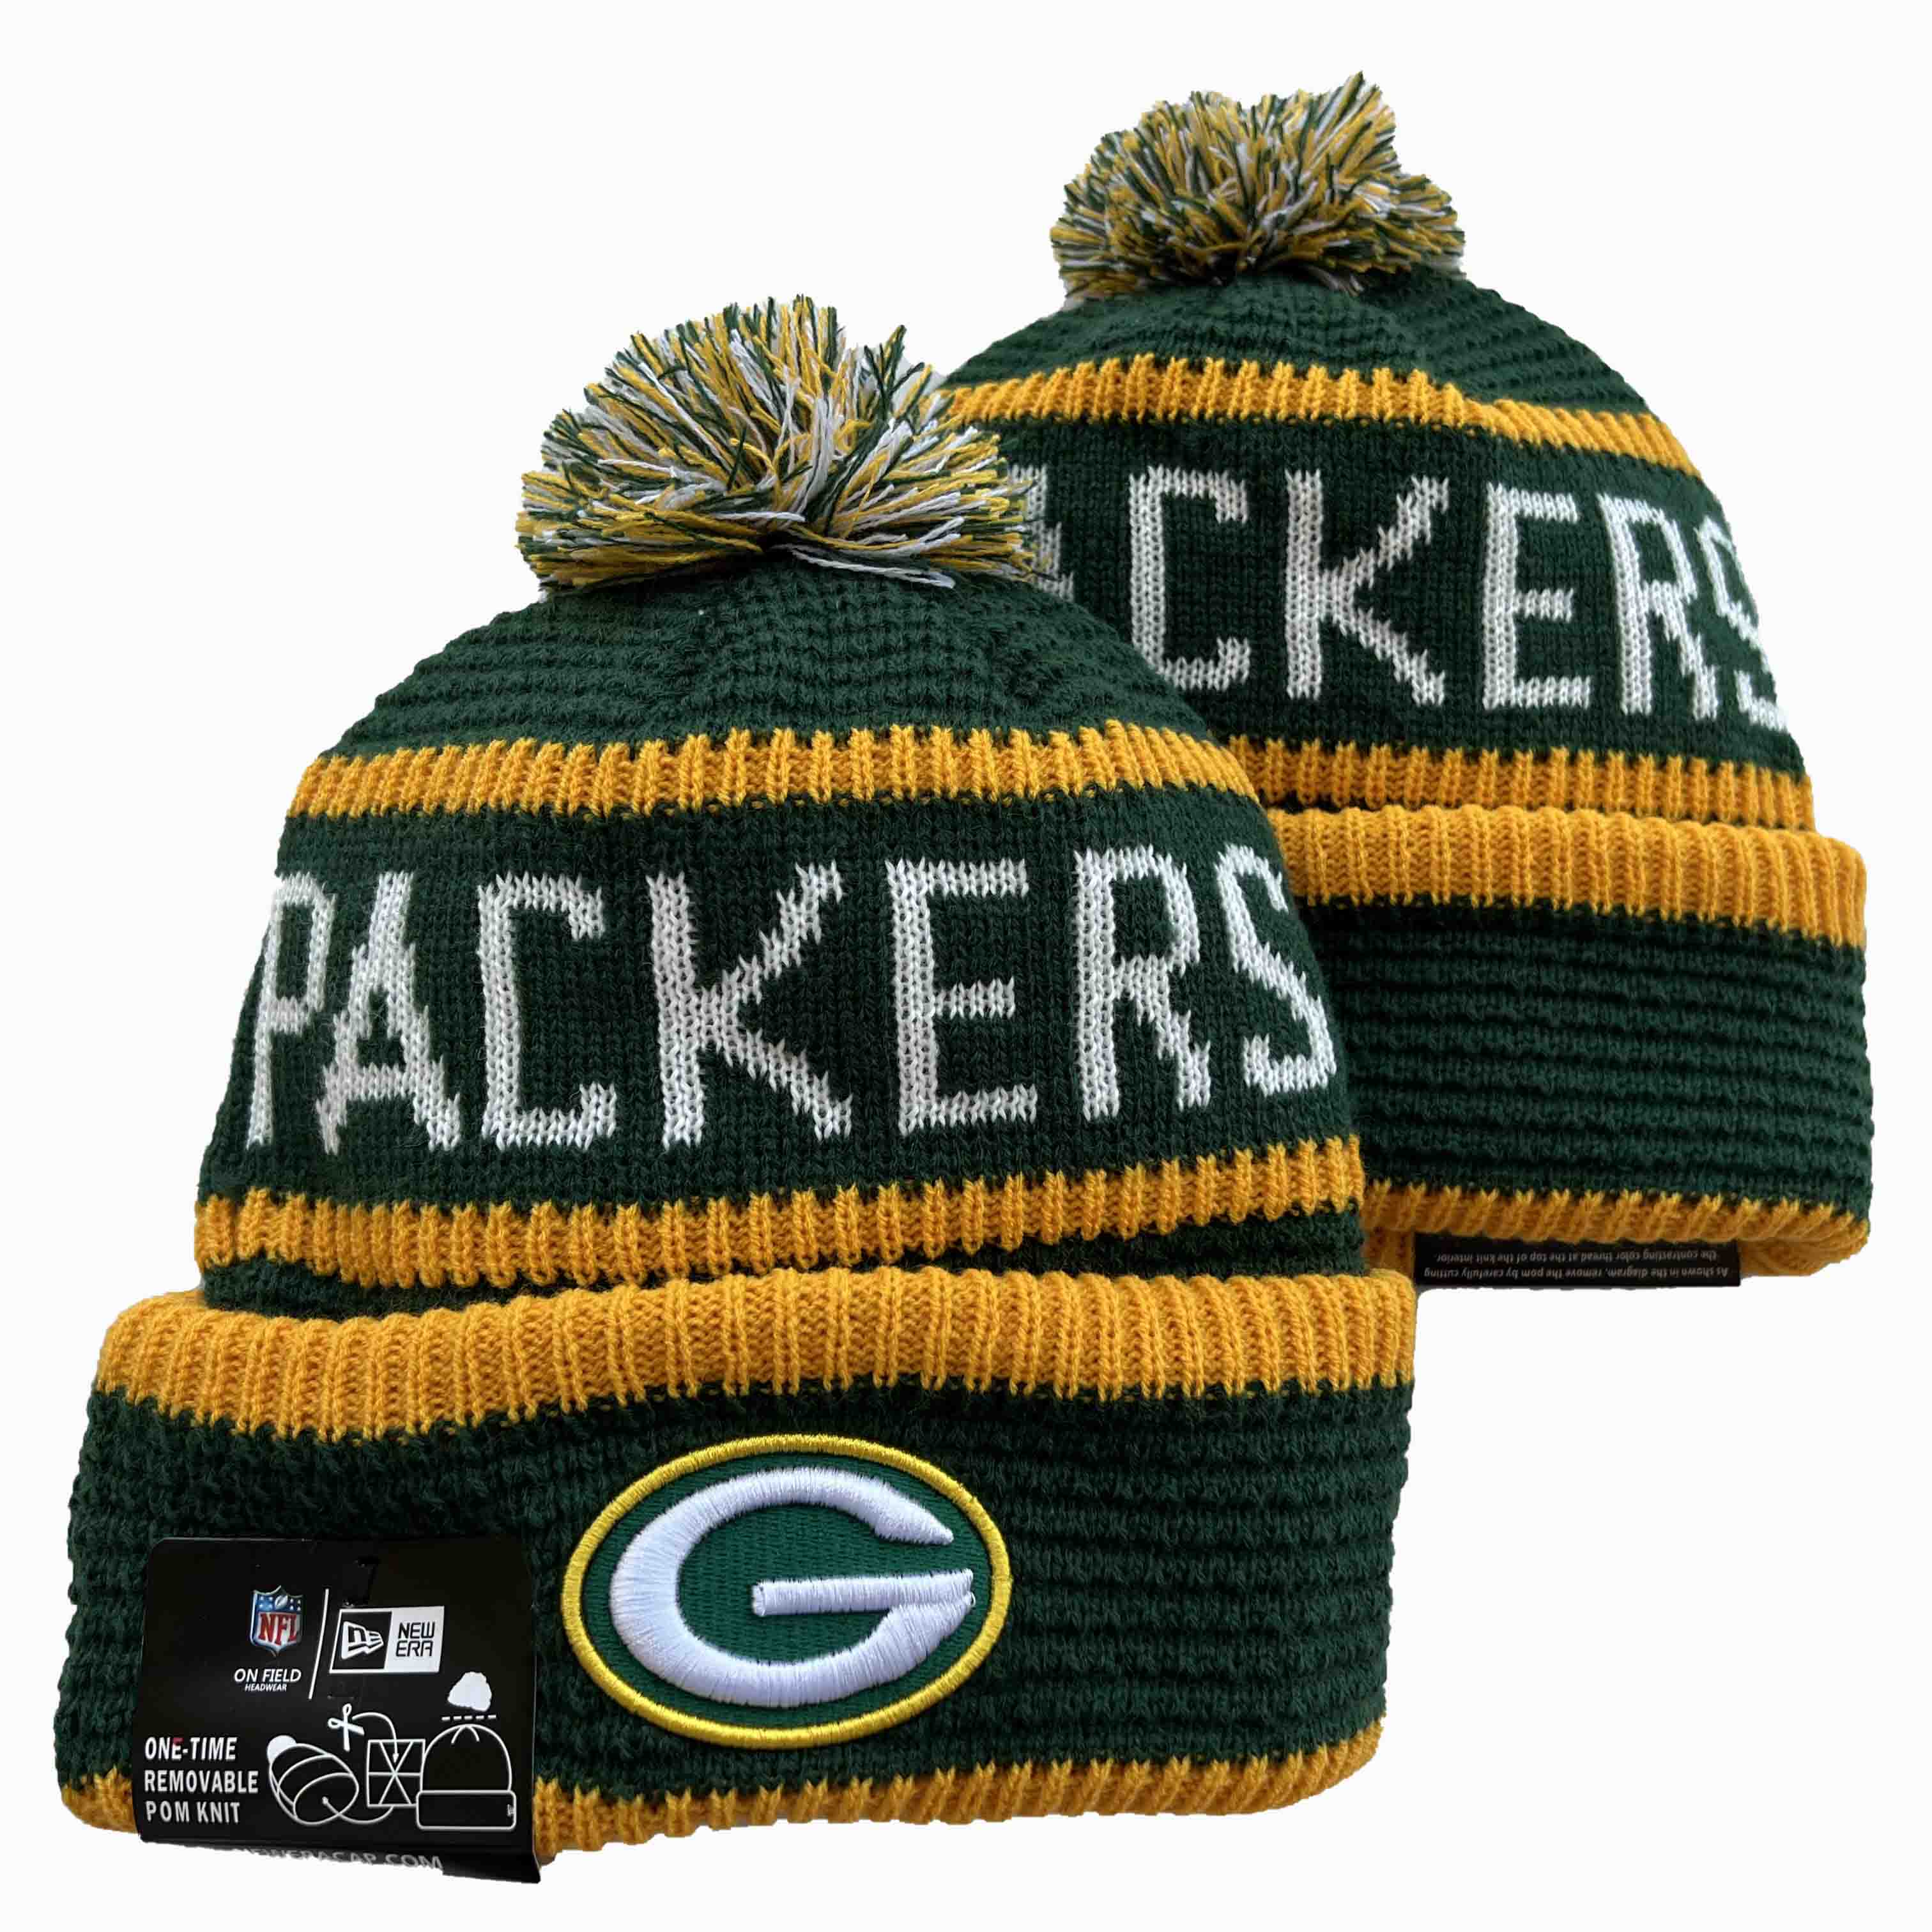 NFL Green Bay Packers Beanies Knit Hats-YD1170